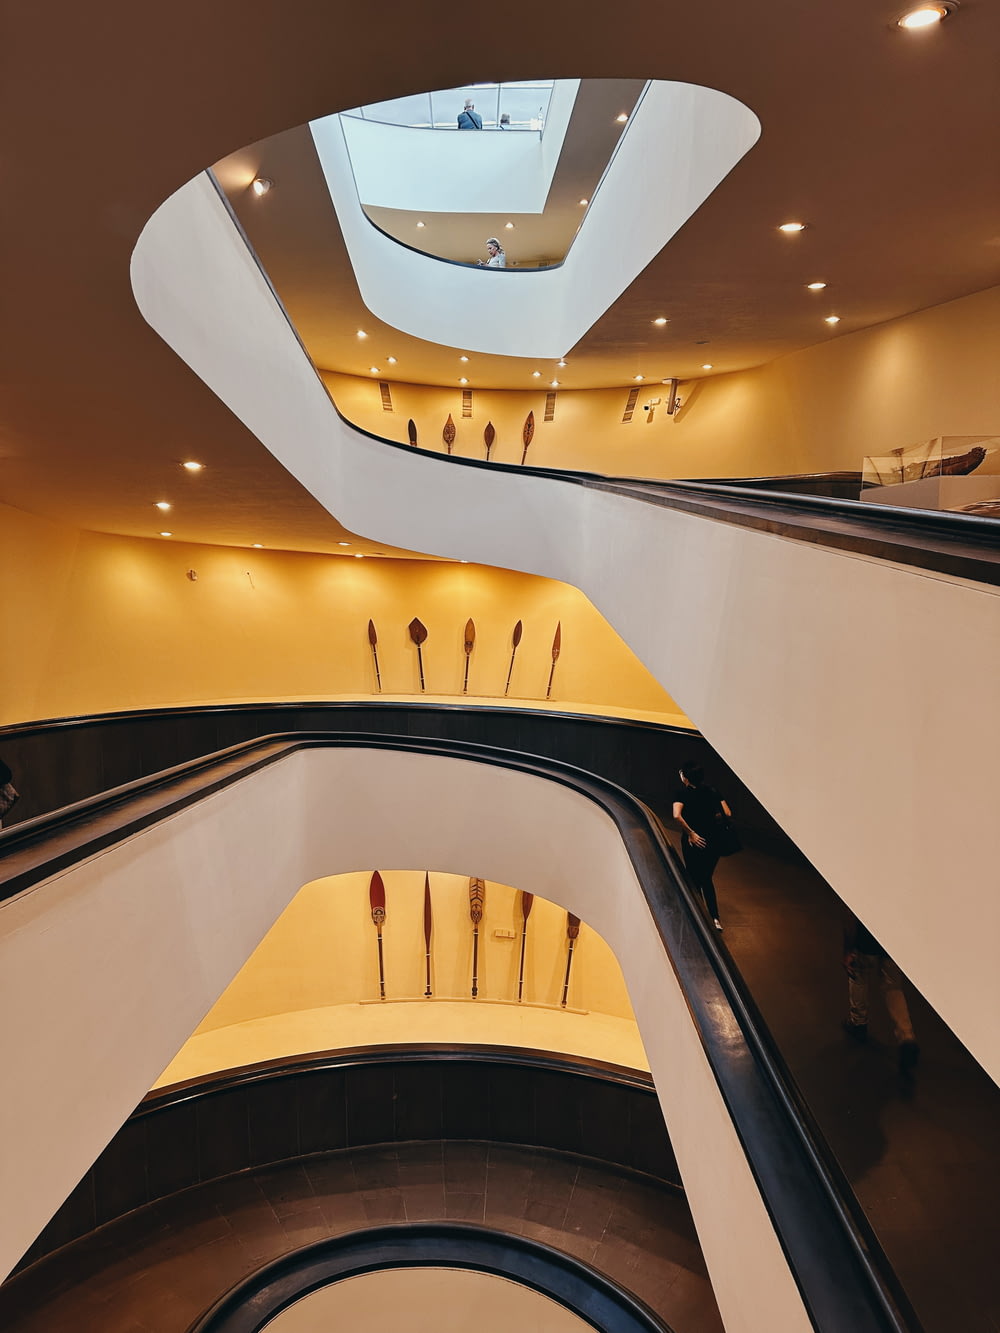 a view of an escalator in a building